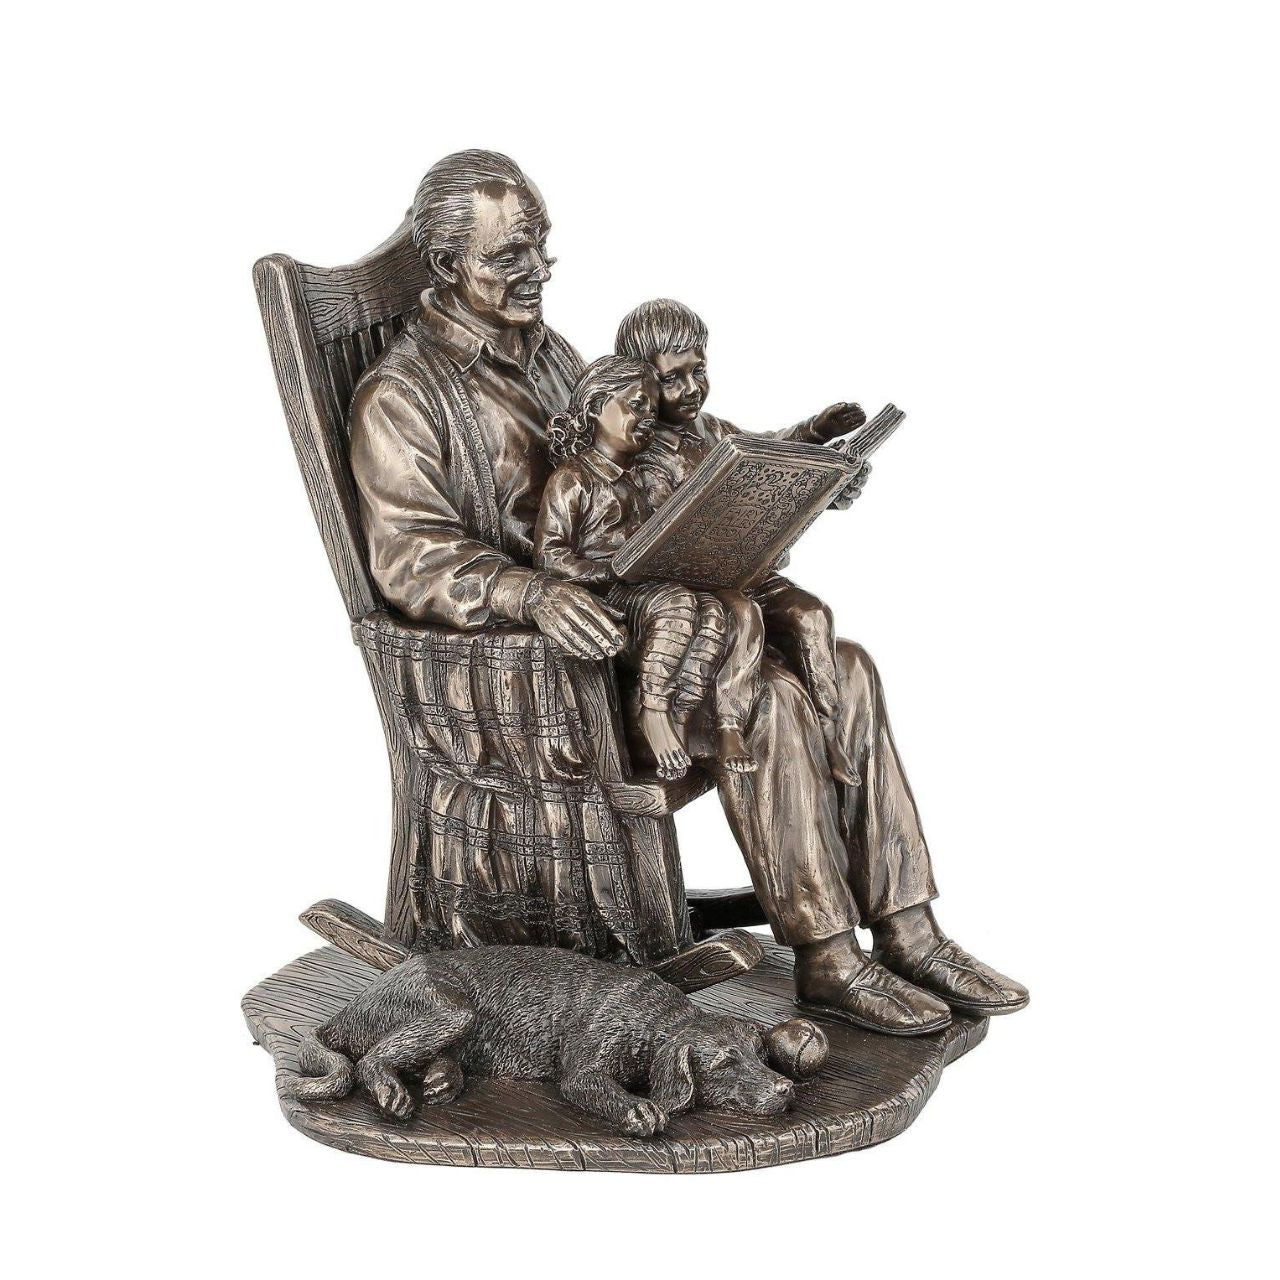 Made with high-quality materials, this figurine captures the magic of storytelling and encourages imagination.